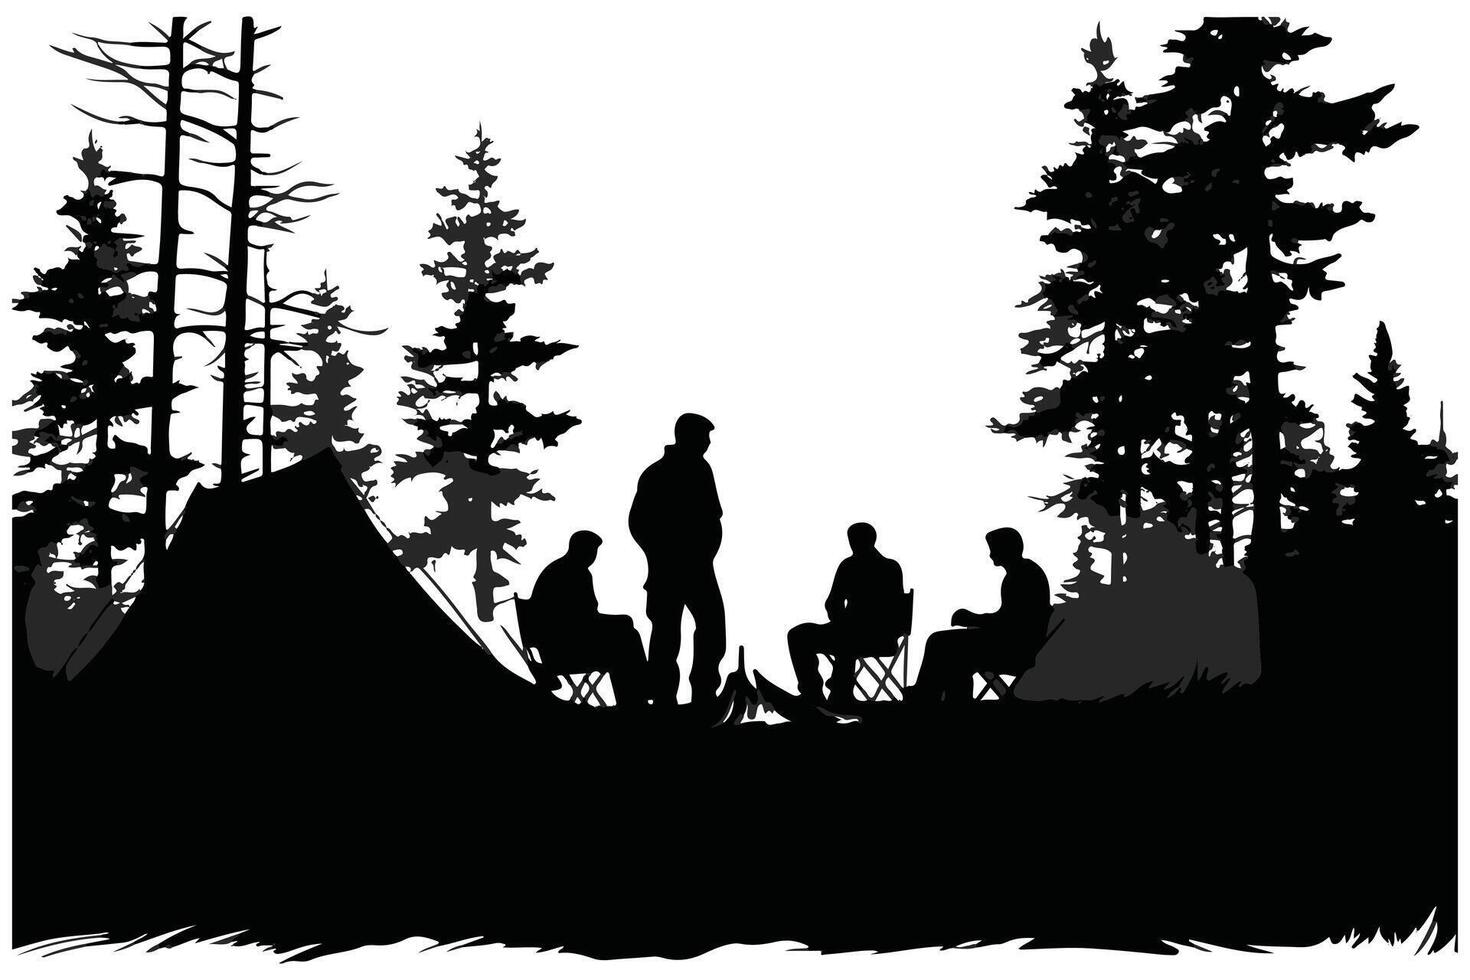 Camping black Silhouette vector